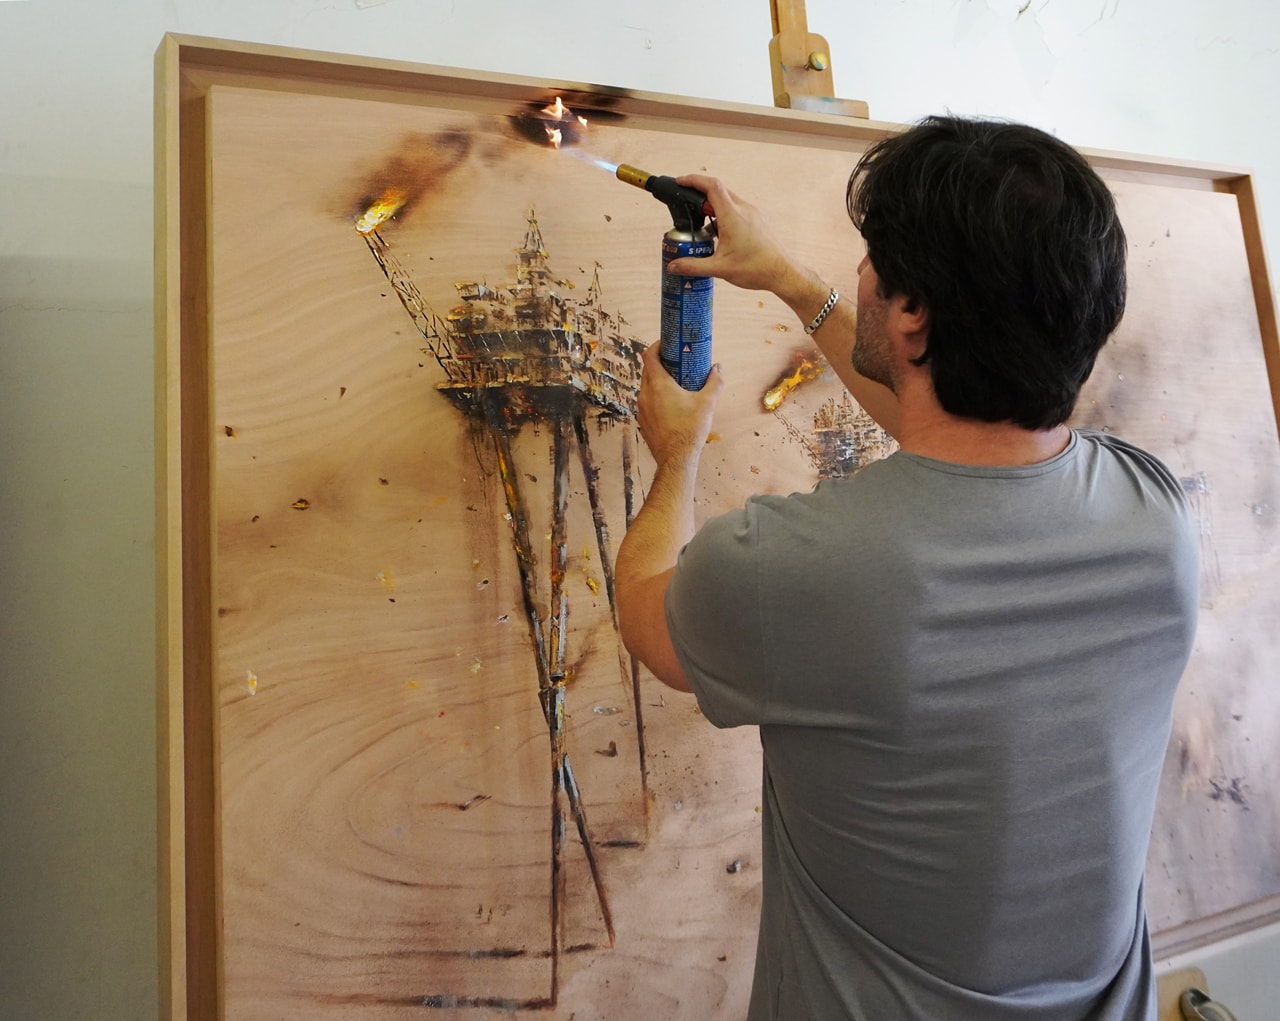 PEJAC Makes His Solo U.S. Debut With '6 FEET UNDER' Exhibition